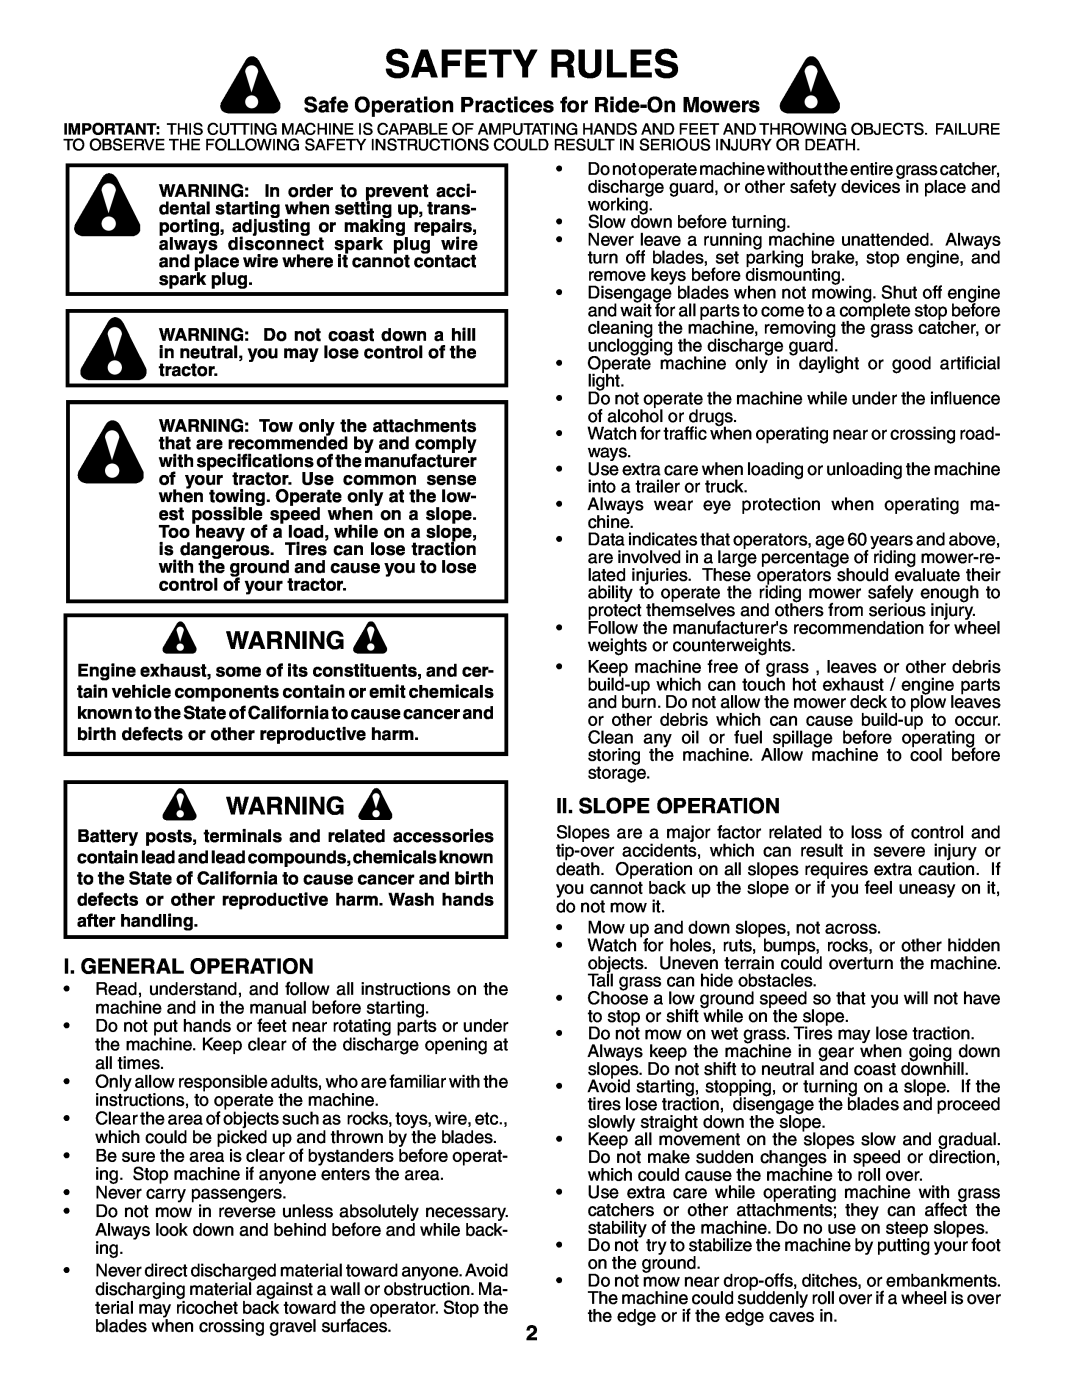 Poulan 194563 manual Safety Rules, Safe Operation Practices for Ride-On Mowers, I. General Operation, Ii. Slope Operation 